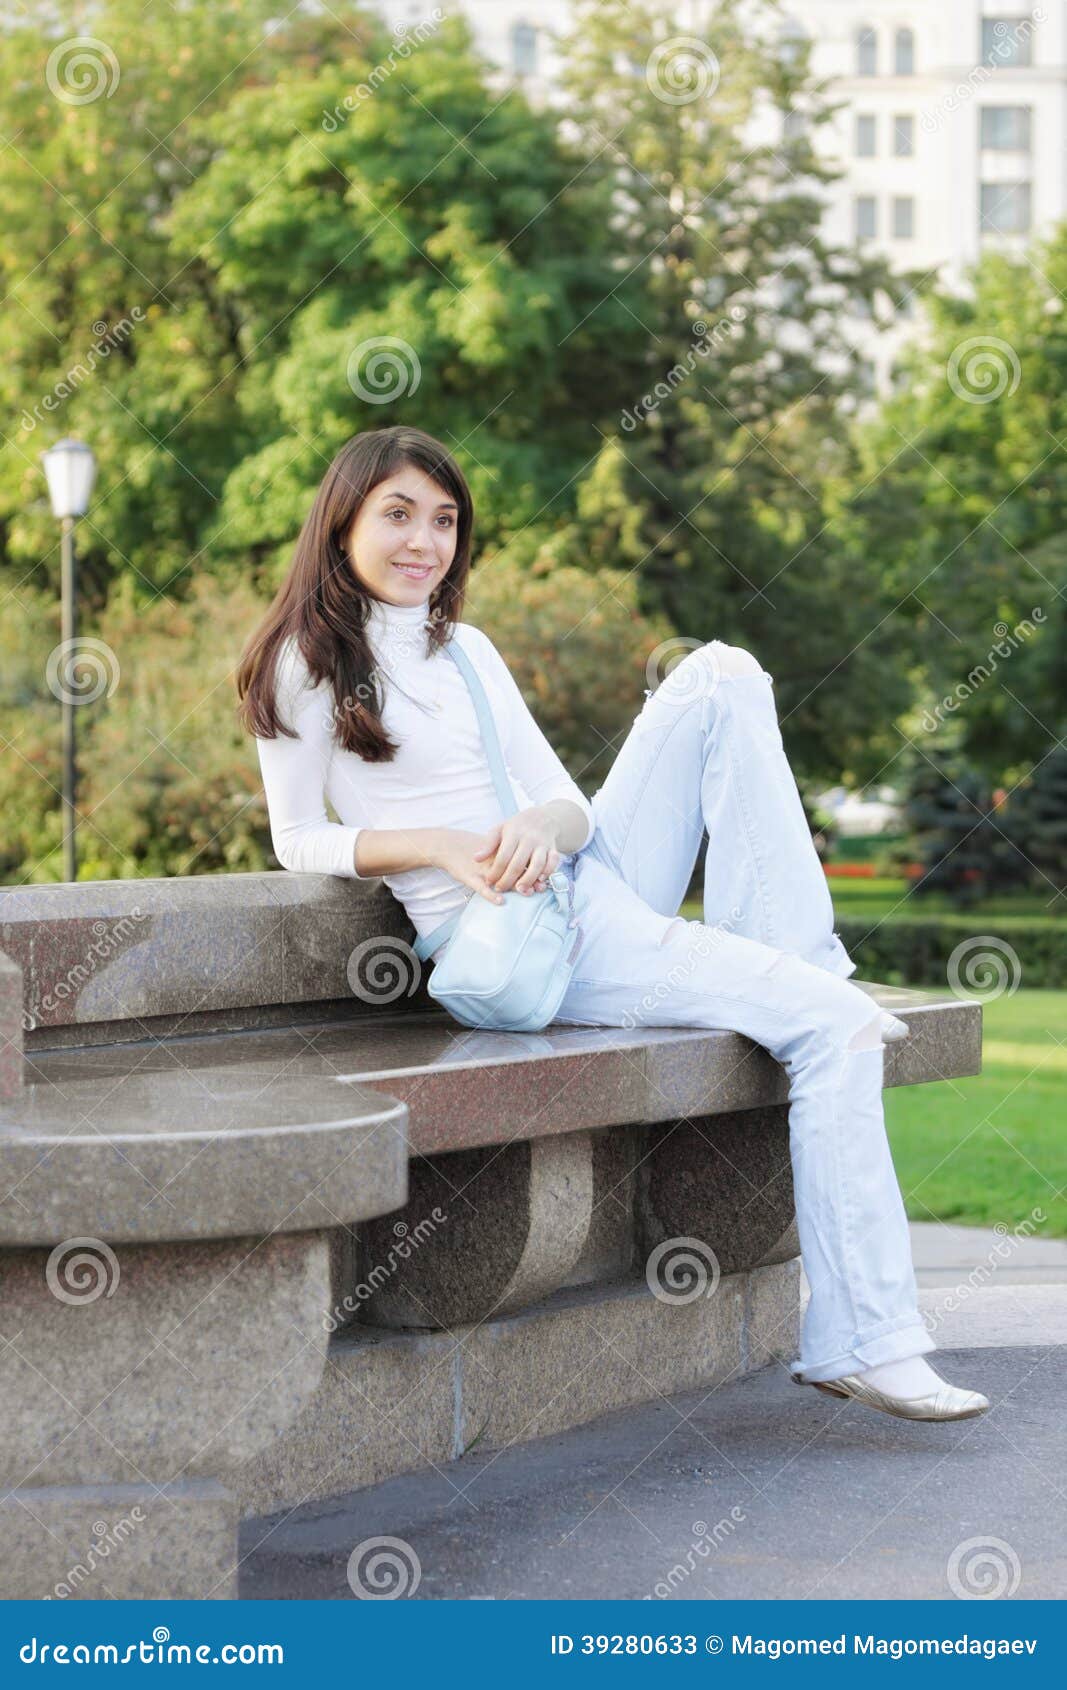 young woman in a park looking sideway